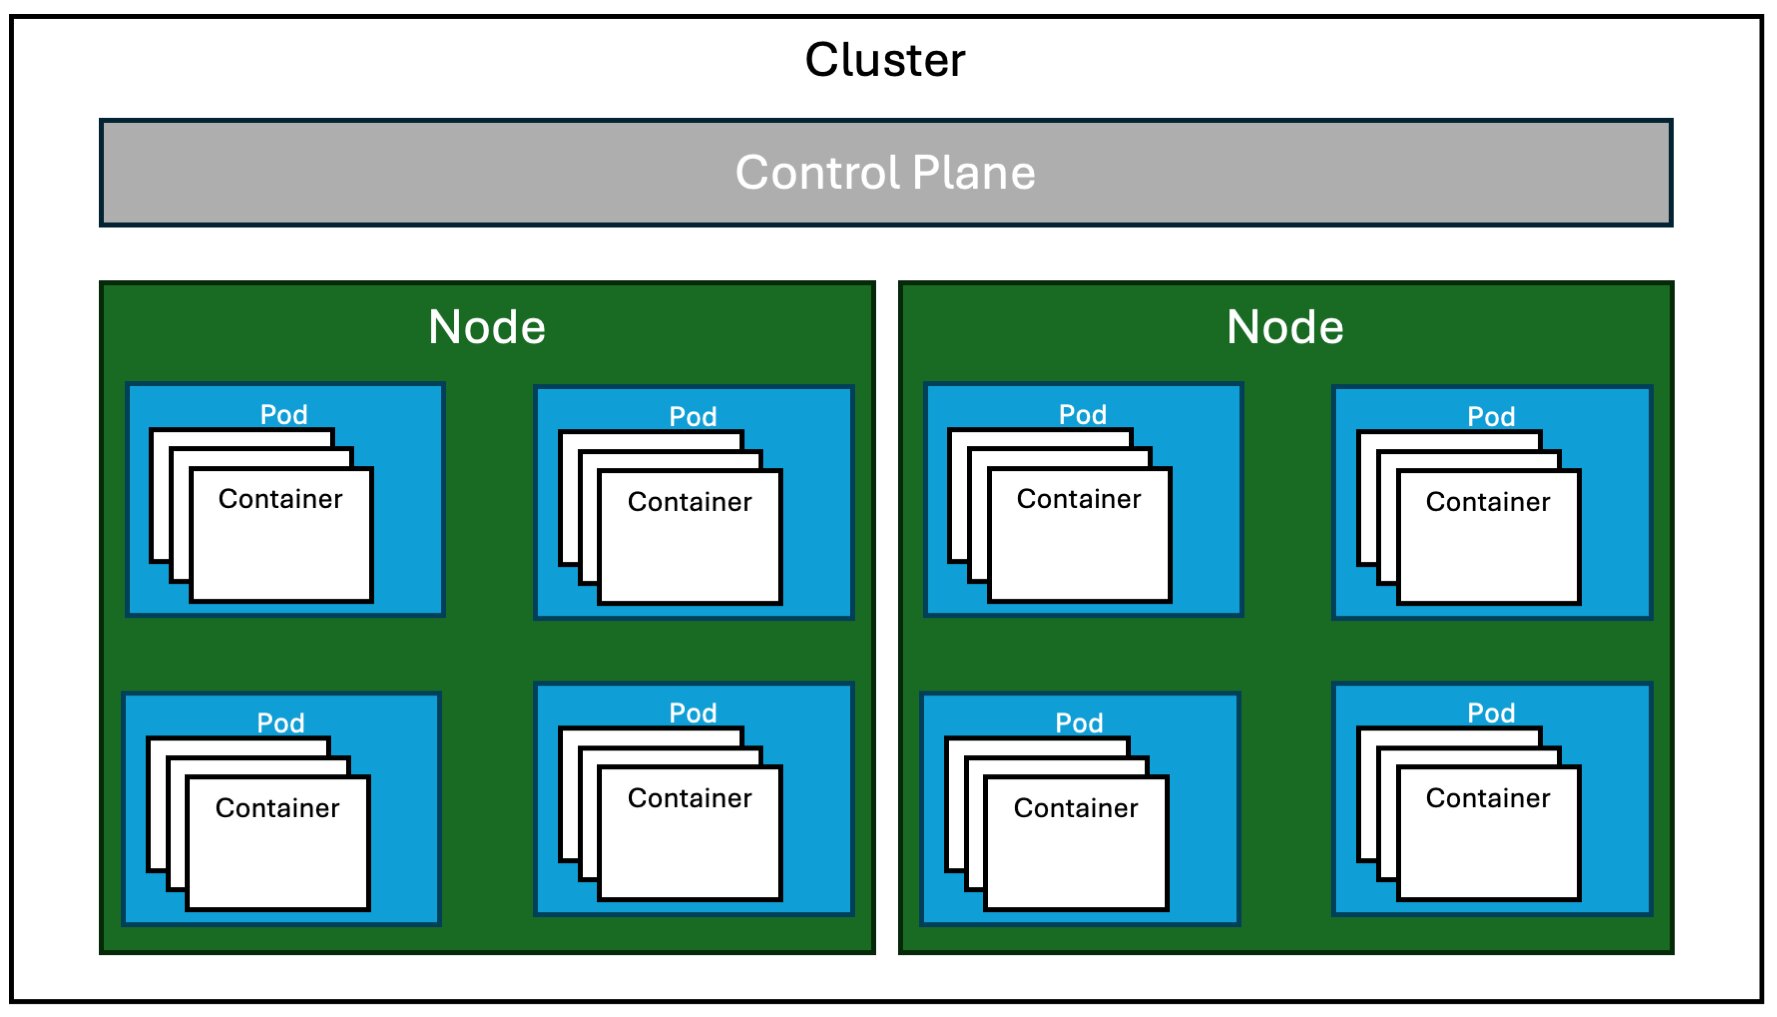 Image of an AKS setup, with many details omitted for brevity. Inside the cluster, there is a control plane and two nodes. Each node has four pods, with any number of containers in them.